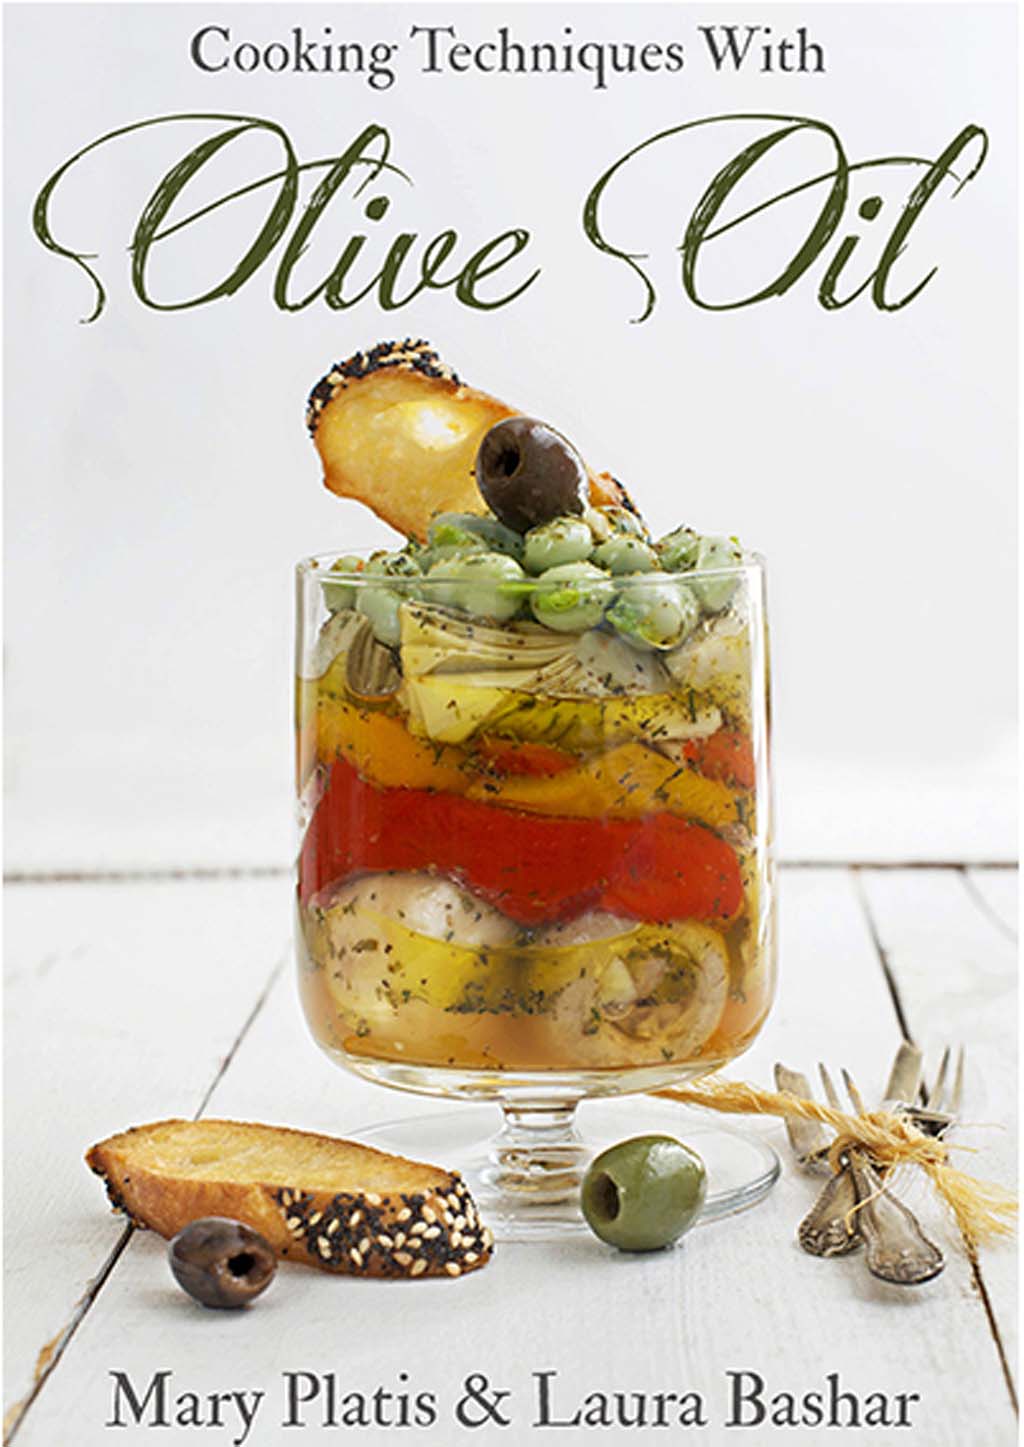 Cooking Techniques with Olive Oil by Laura Bashar and Mary Plati